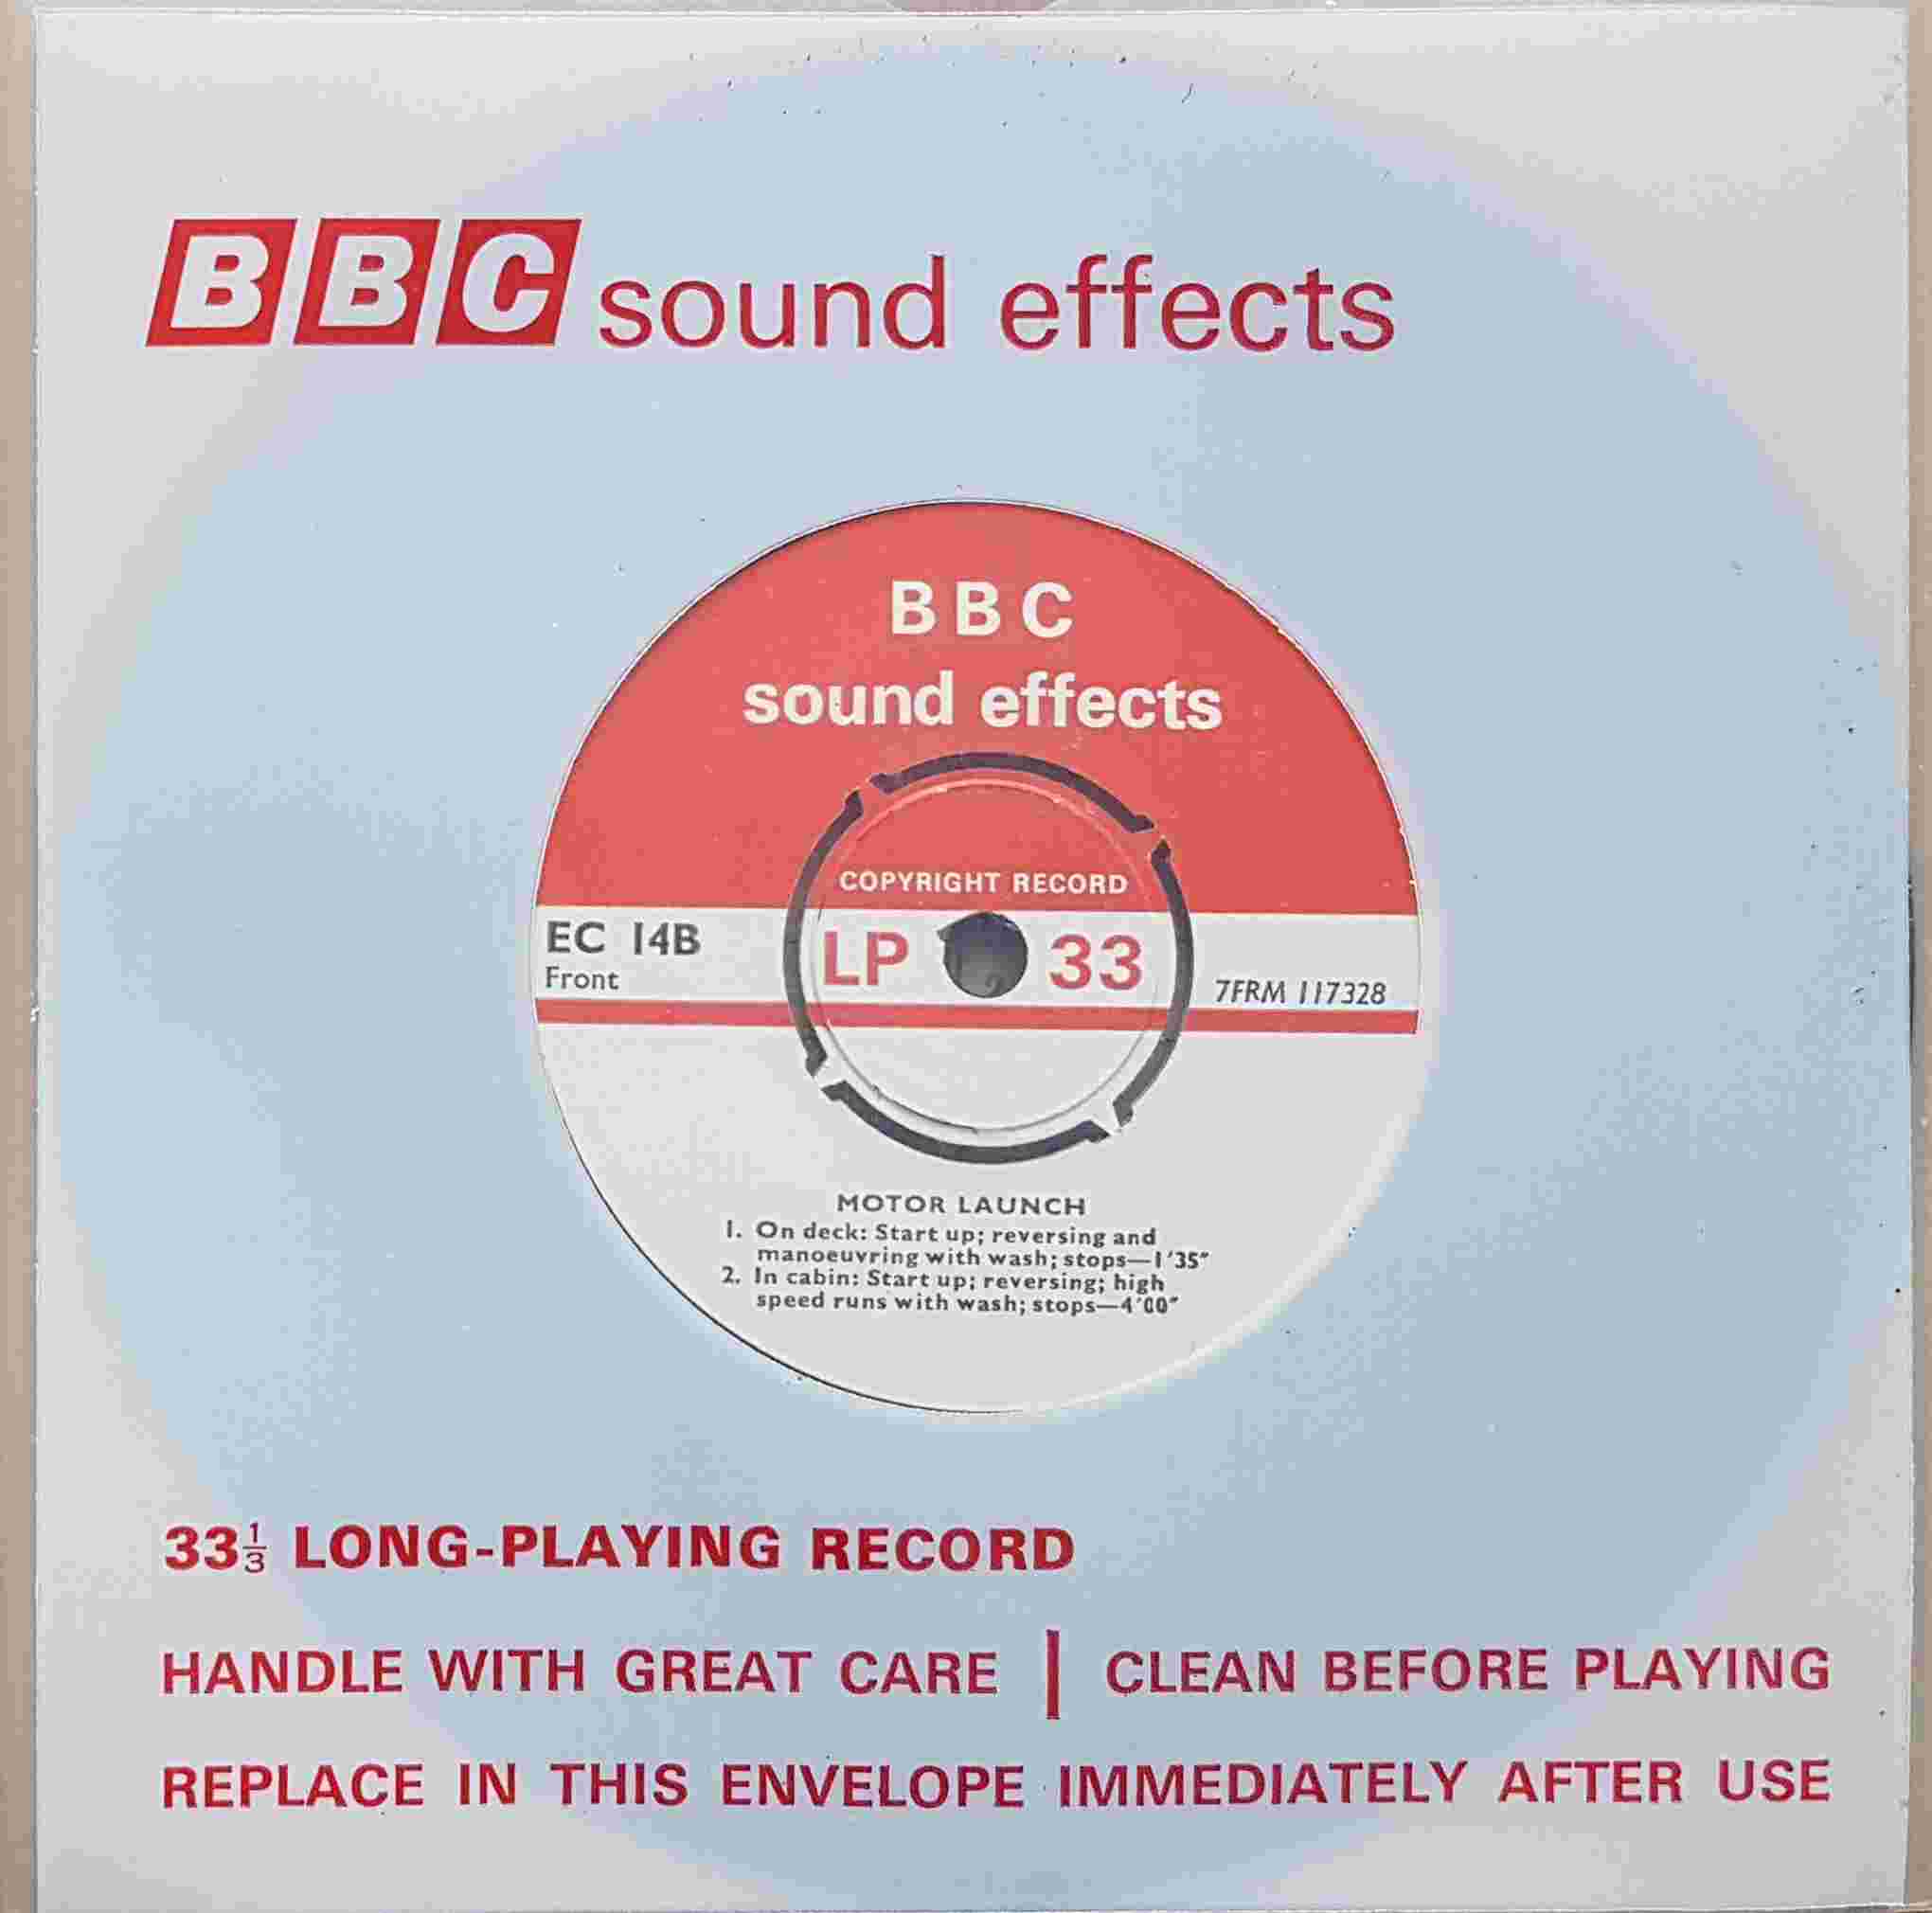 Picture of EC 14B Motor launch single by artist Not registered from the BBC records and Tapes library